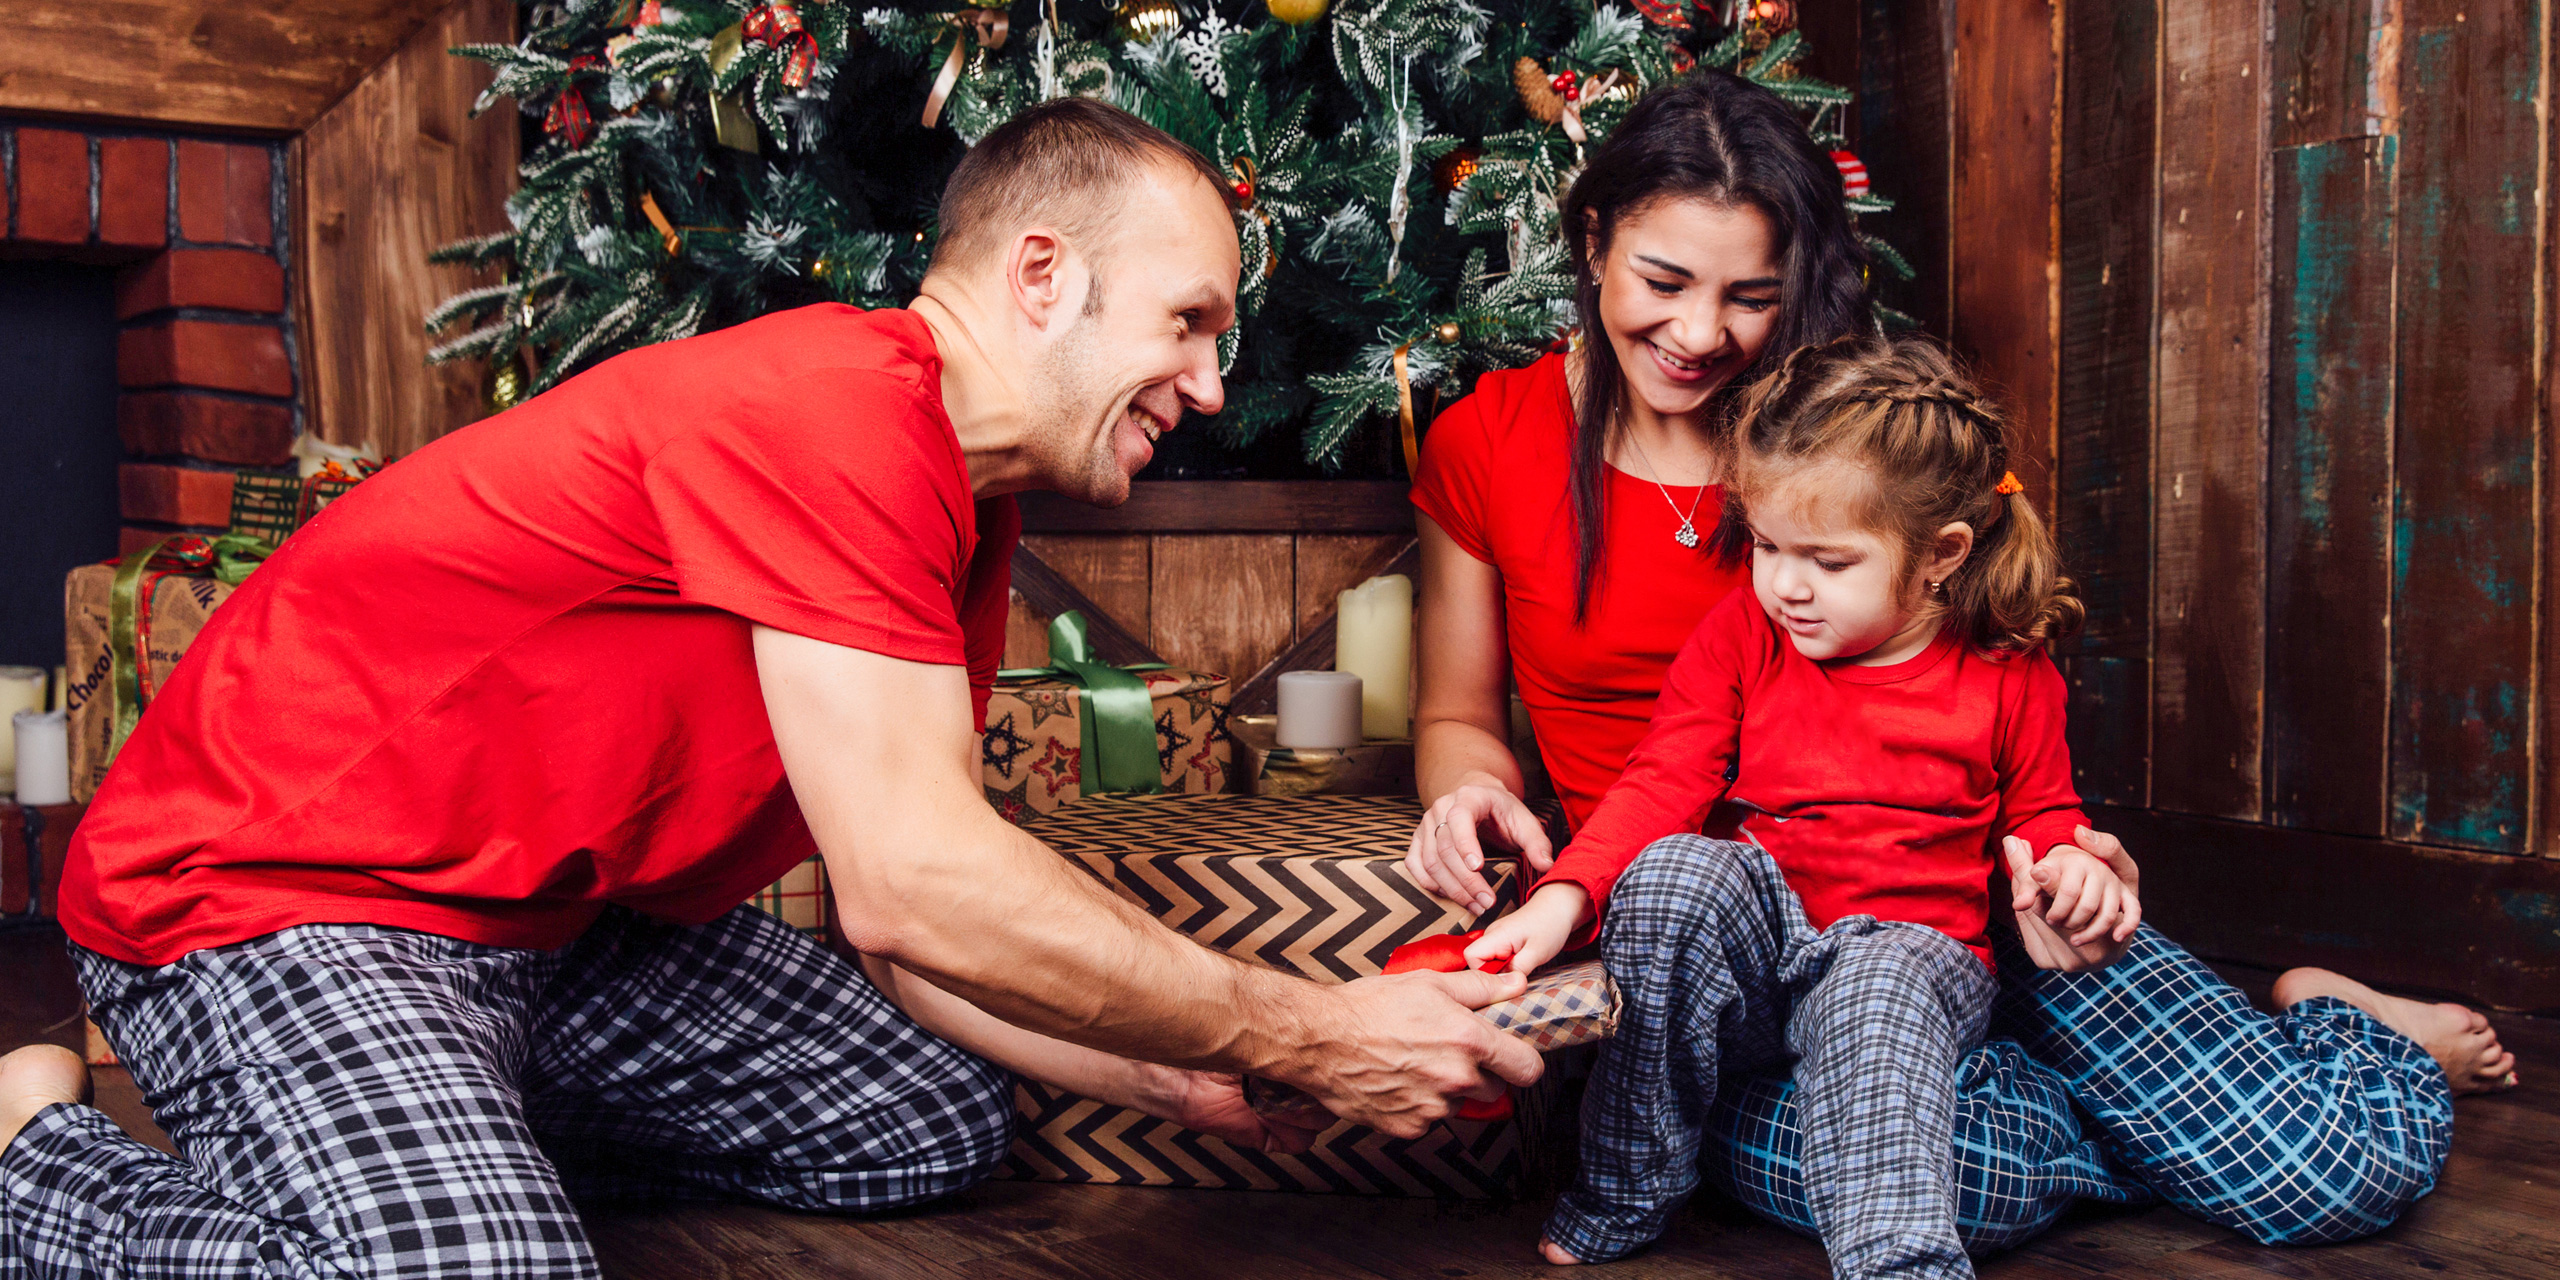 family in pajamas plays next to a Christmas tree and a fireplace. ; Courtesy of vhpicstock /Shutterstock